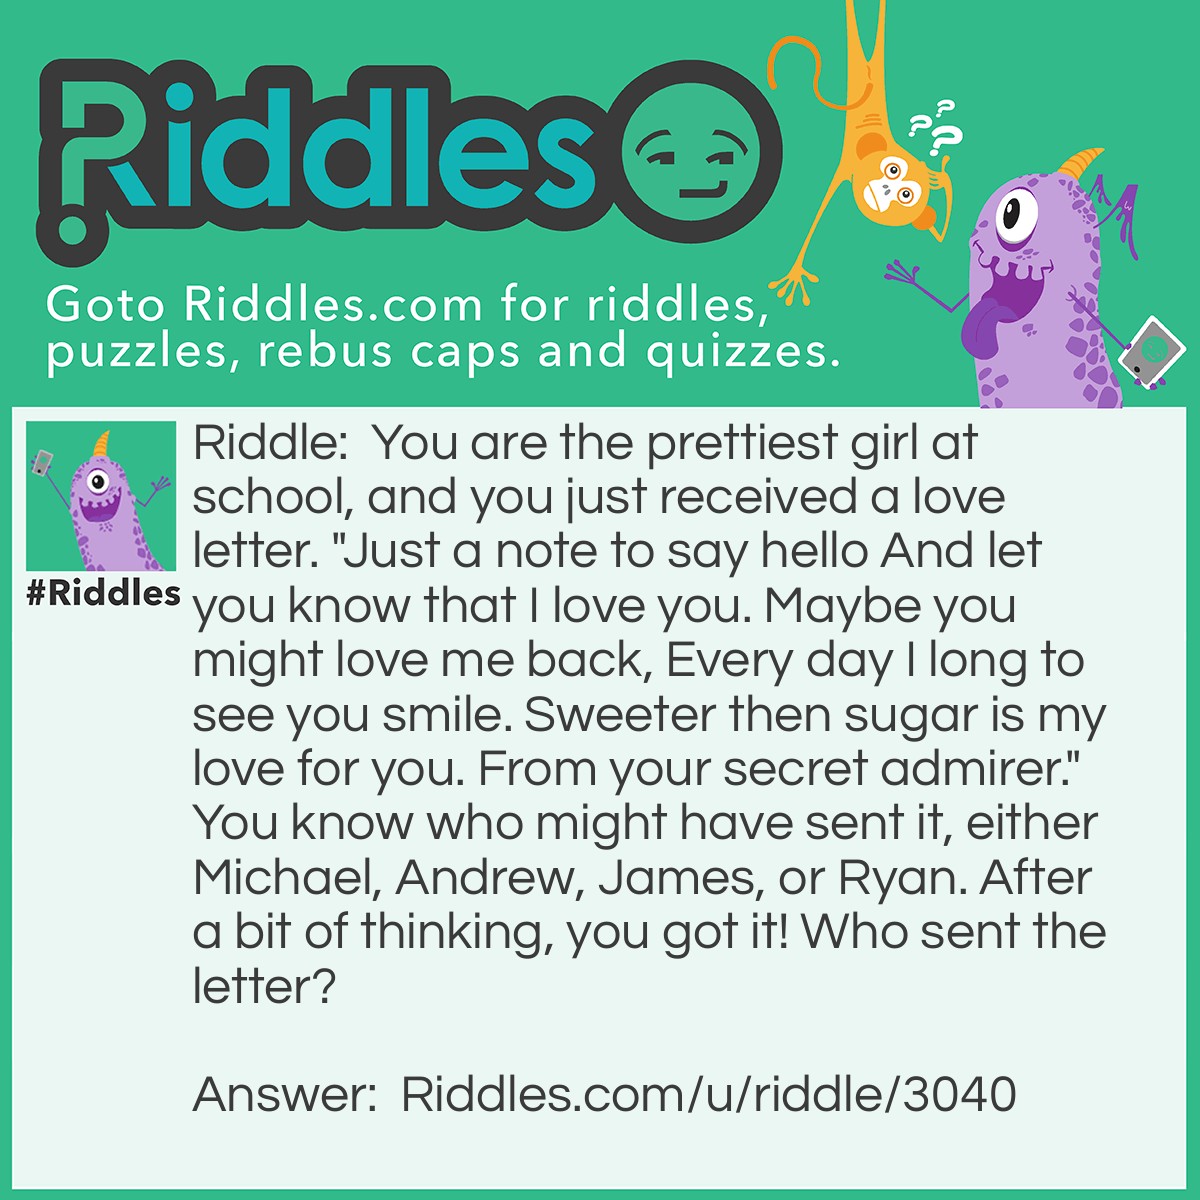 Riddle: You are the prettiest girl at school, and you just received a love letter. "Just a note to say hello And let you know that I love you. Maybe you might love me back, Every day I long to see you smile. Sweeter then sugar is my love for you. From your secret admirer." You know who might have sent it, either Michael, Andrew, James, or Ryan. After a bit of thinking, you got it! Who sent the letter? Answer: James.